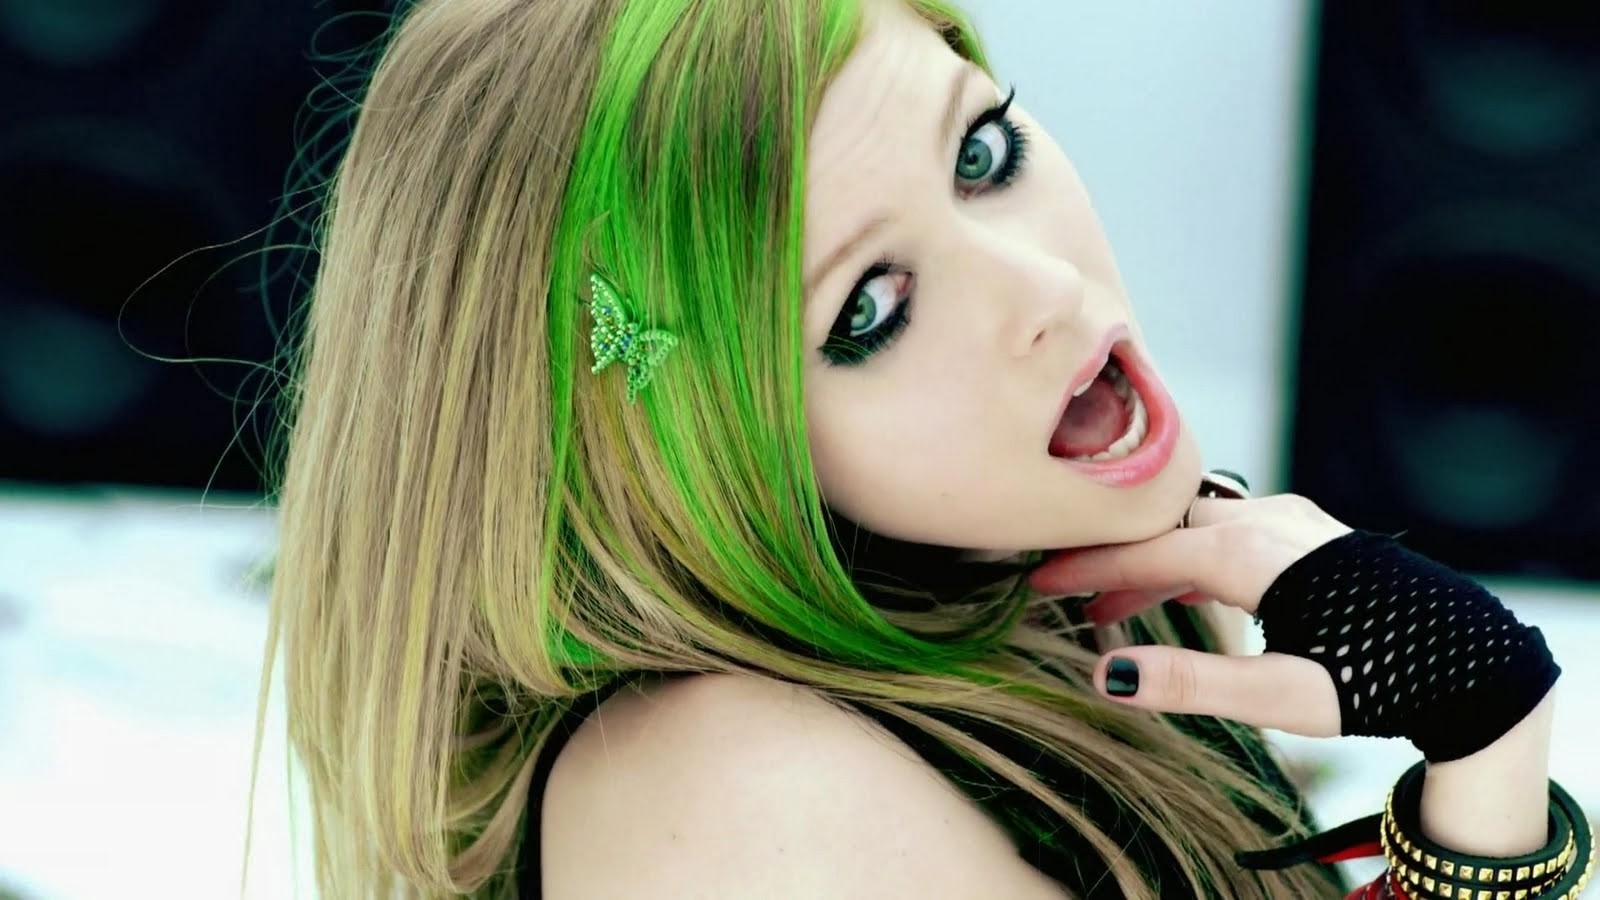 People 1600x900 Avril Lavigne dyed hair singer open mouth green hair painted nails women celebrity makeup eyeliner fingerless gloves looking at viewer long hair face closeup